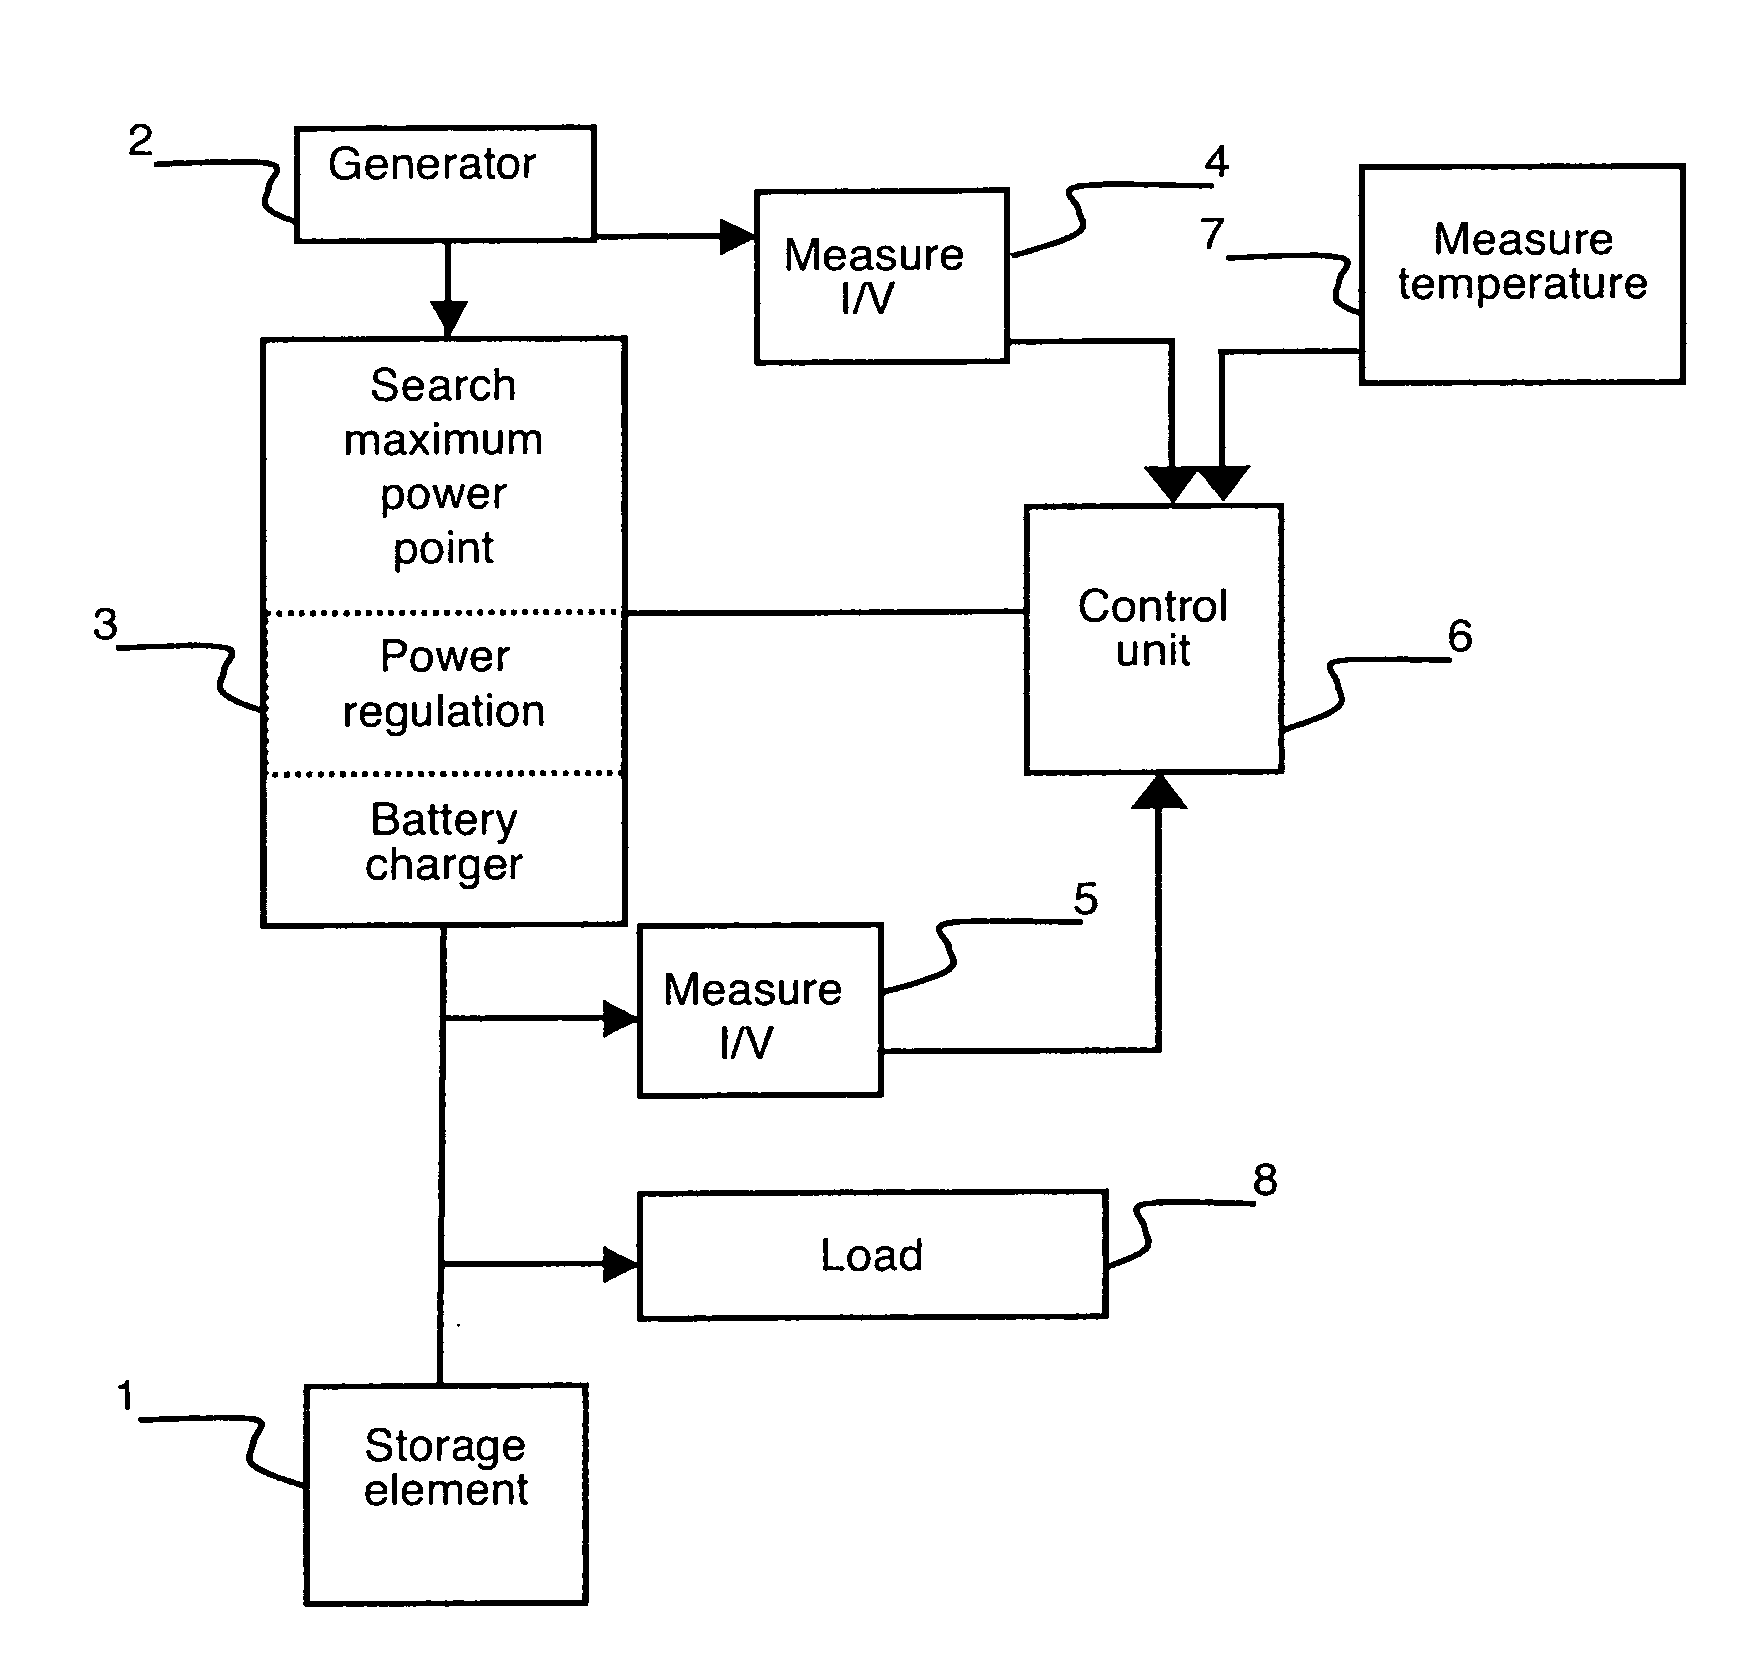 Method of diagnosing defective elements in a standalone system, powered by an intermittent power source